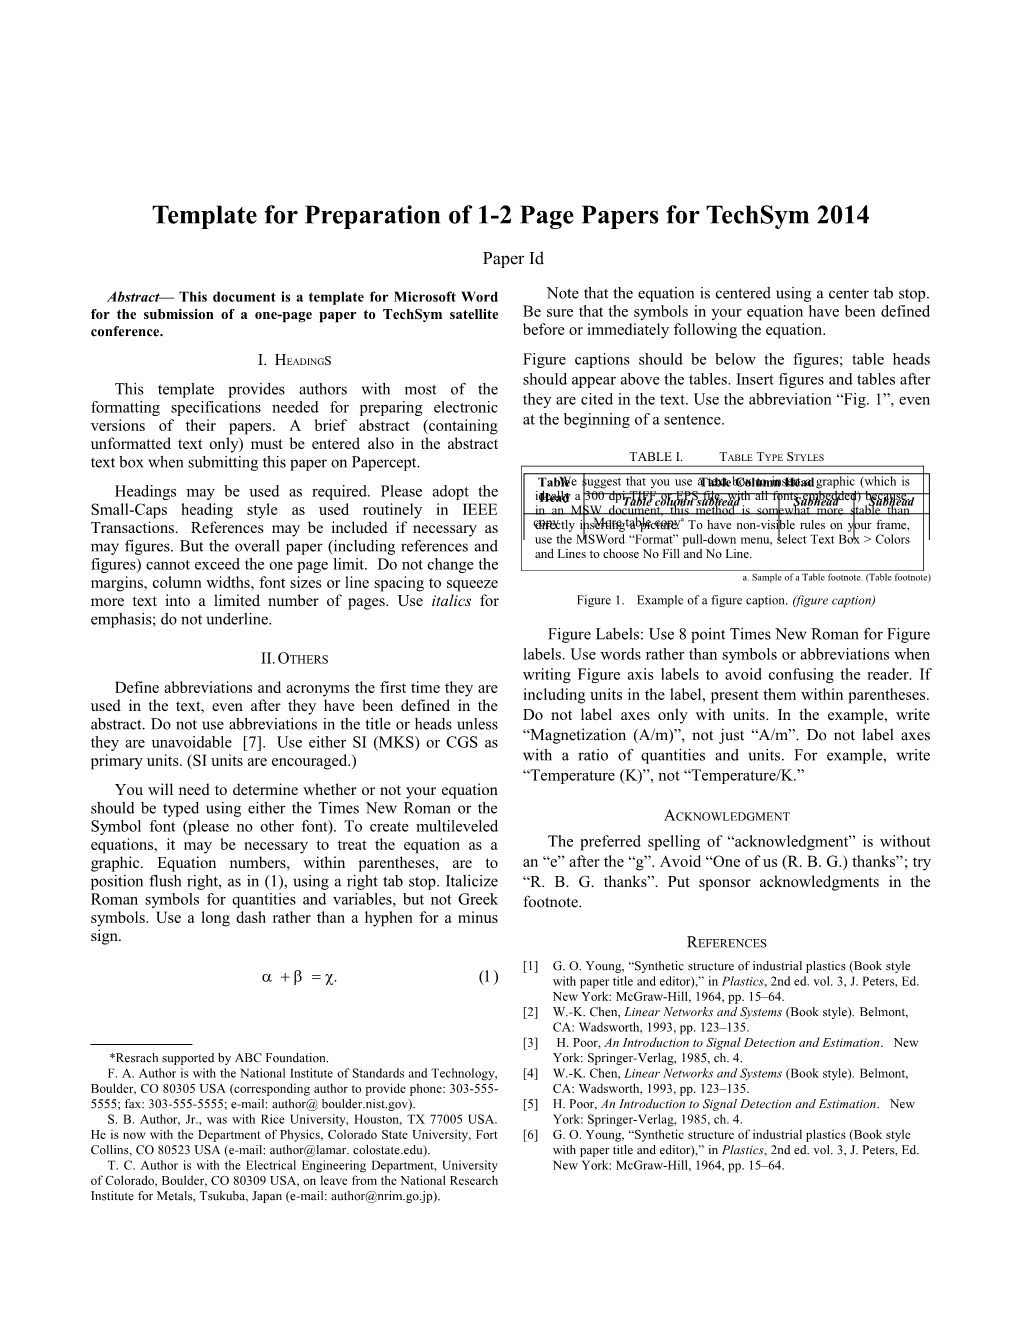 Template for Preparation of 1-2 Page Papers for Techsym 2014